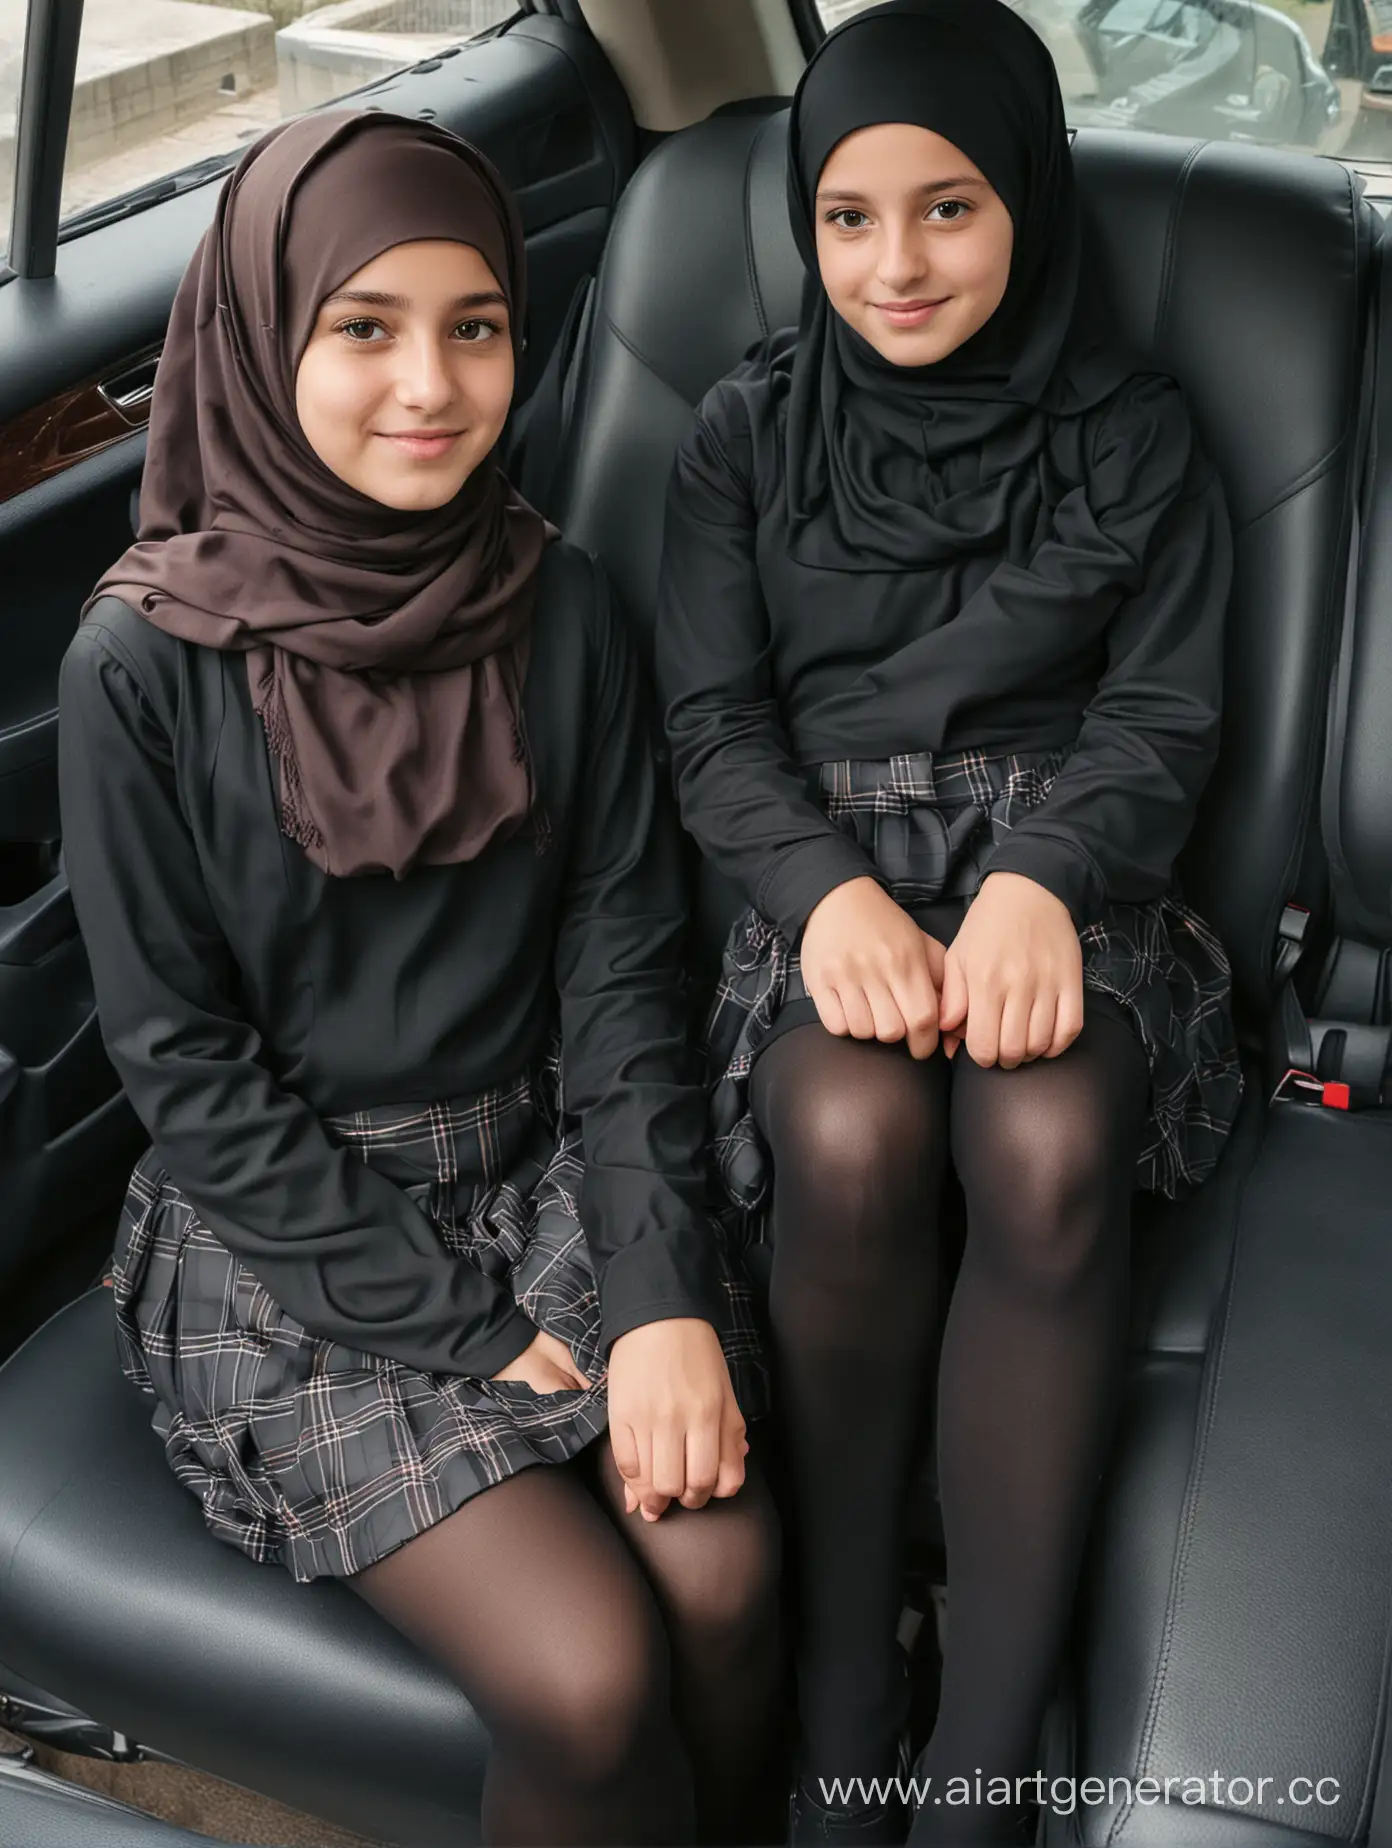 Two-Young-Girls-Wearing-Hijab-and-School-Uniforms-Sitting-in-Car-Seat